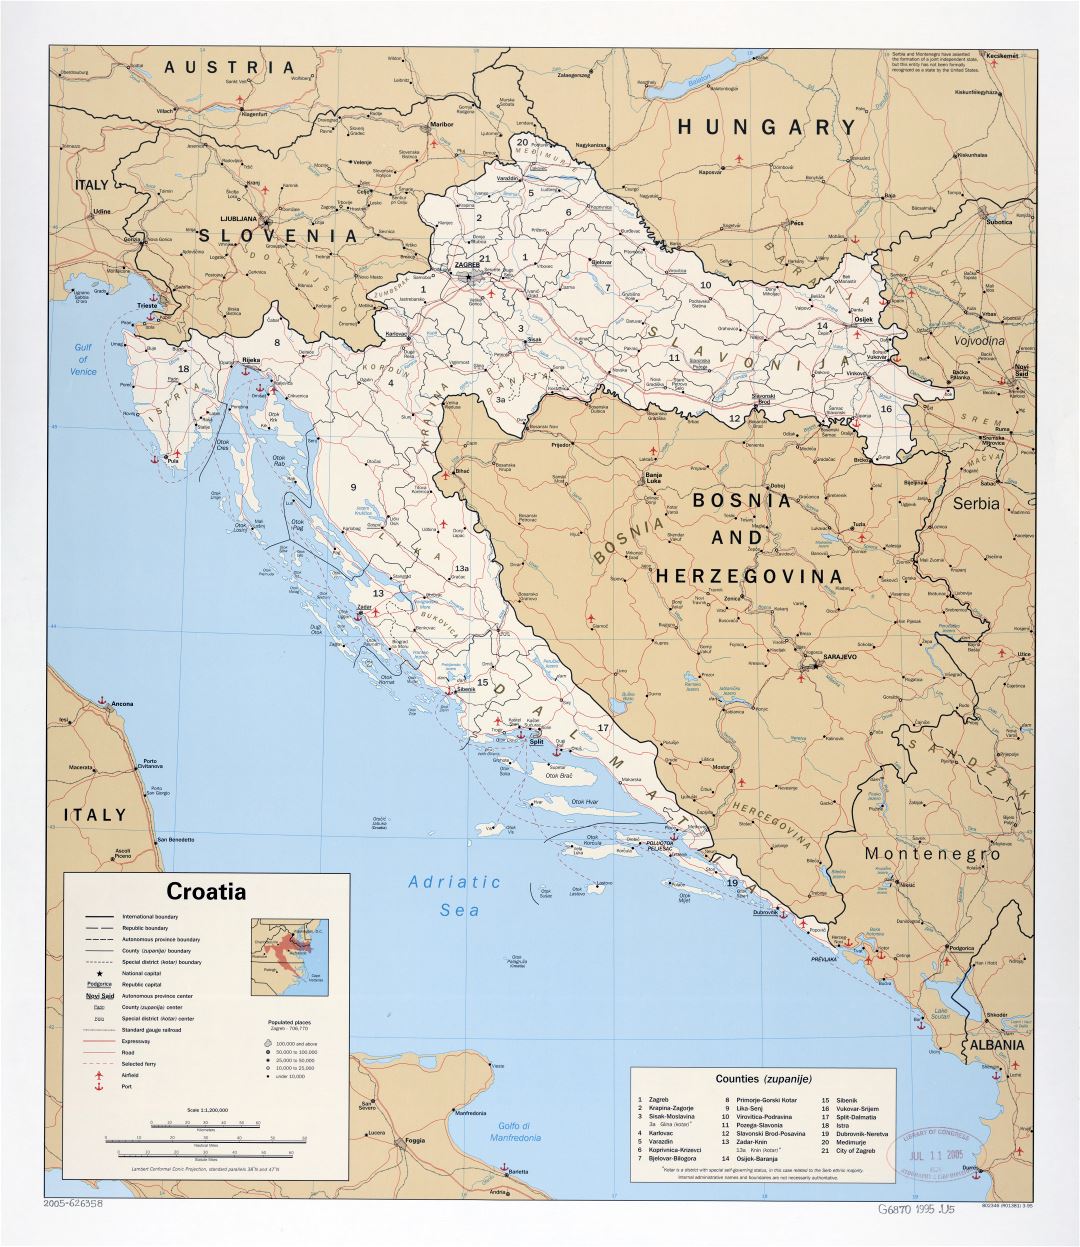 Large scale political and administrative map of Croatia with roads, major cities, seaports and airports - 1995